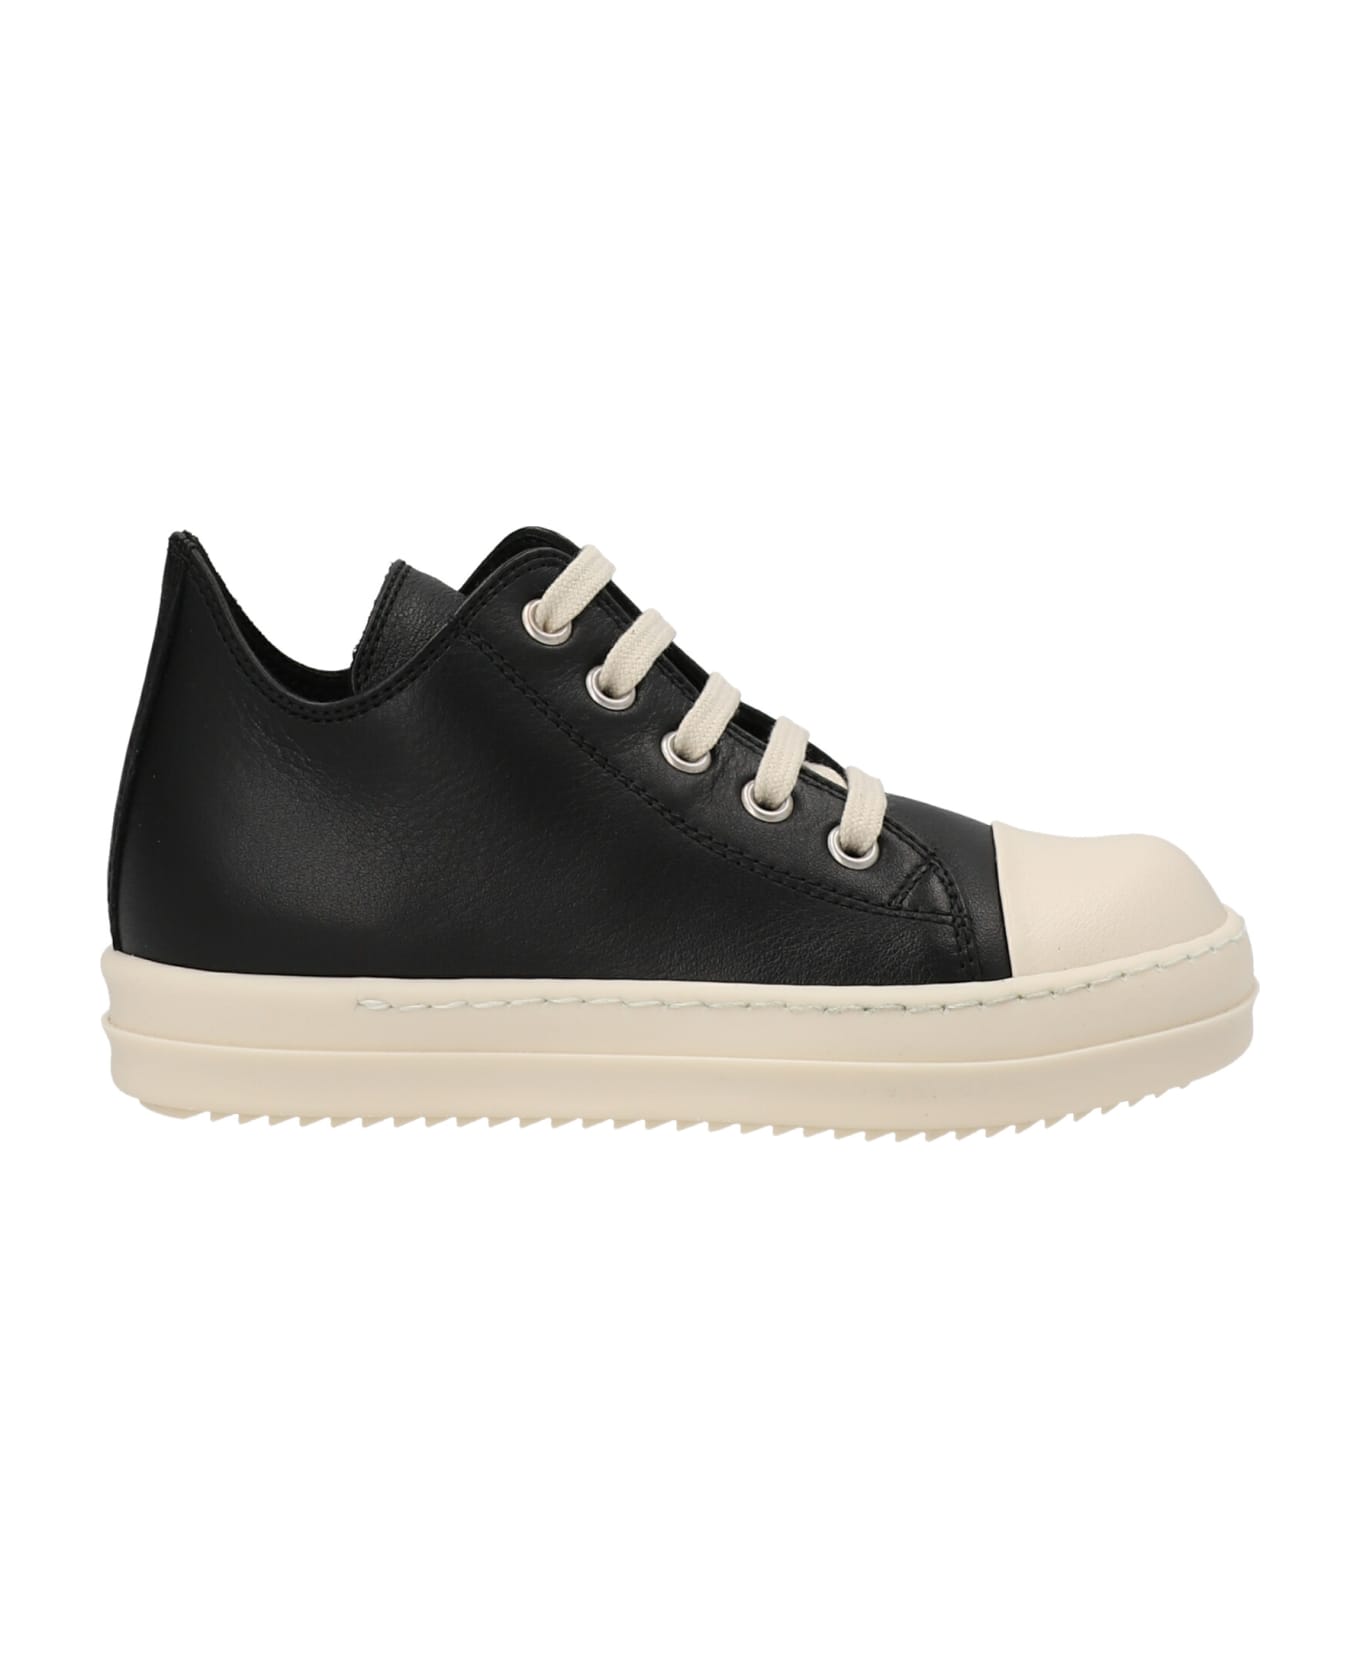 Rick Owens Leather Sneakers - White/Black